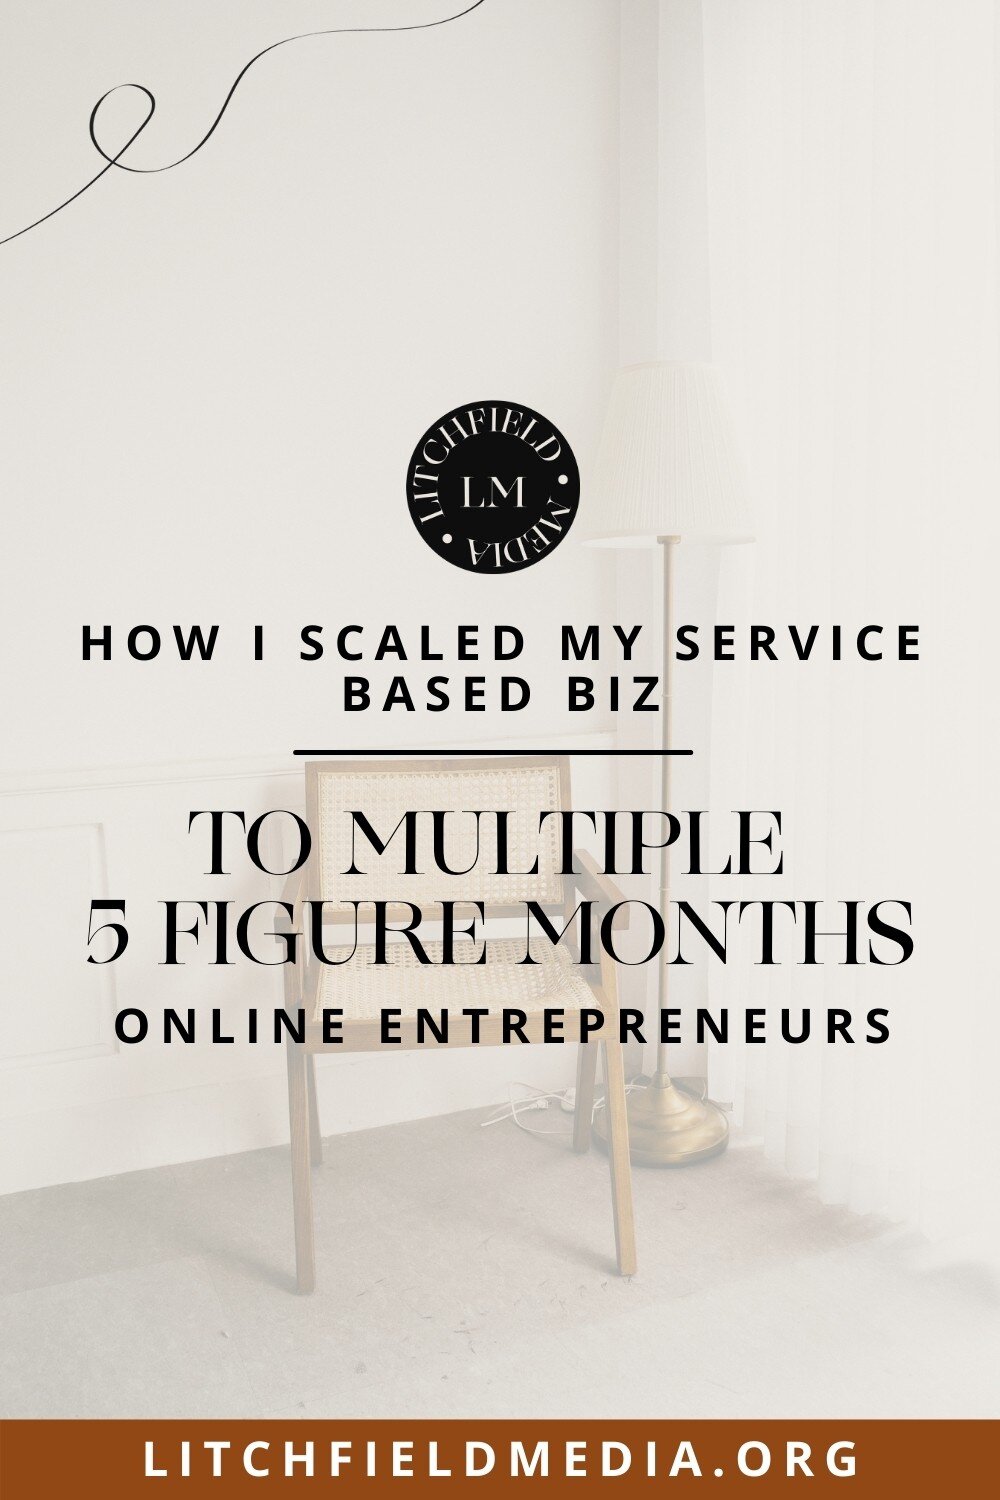 Litchfield Media Blog How I scaled my business to multiple 5 figure months.jpg